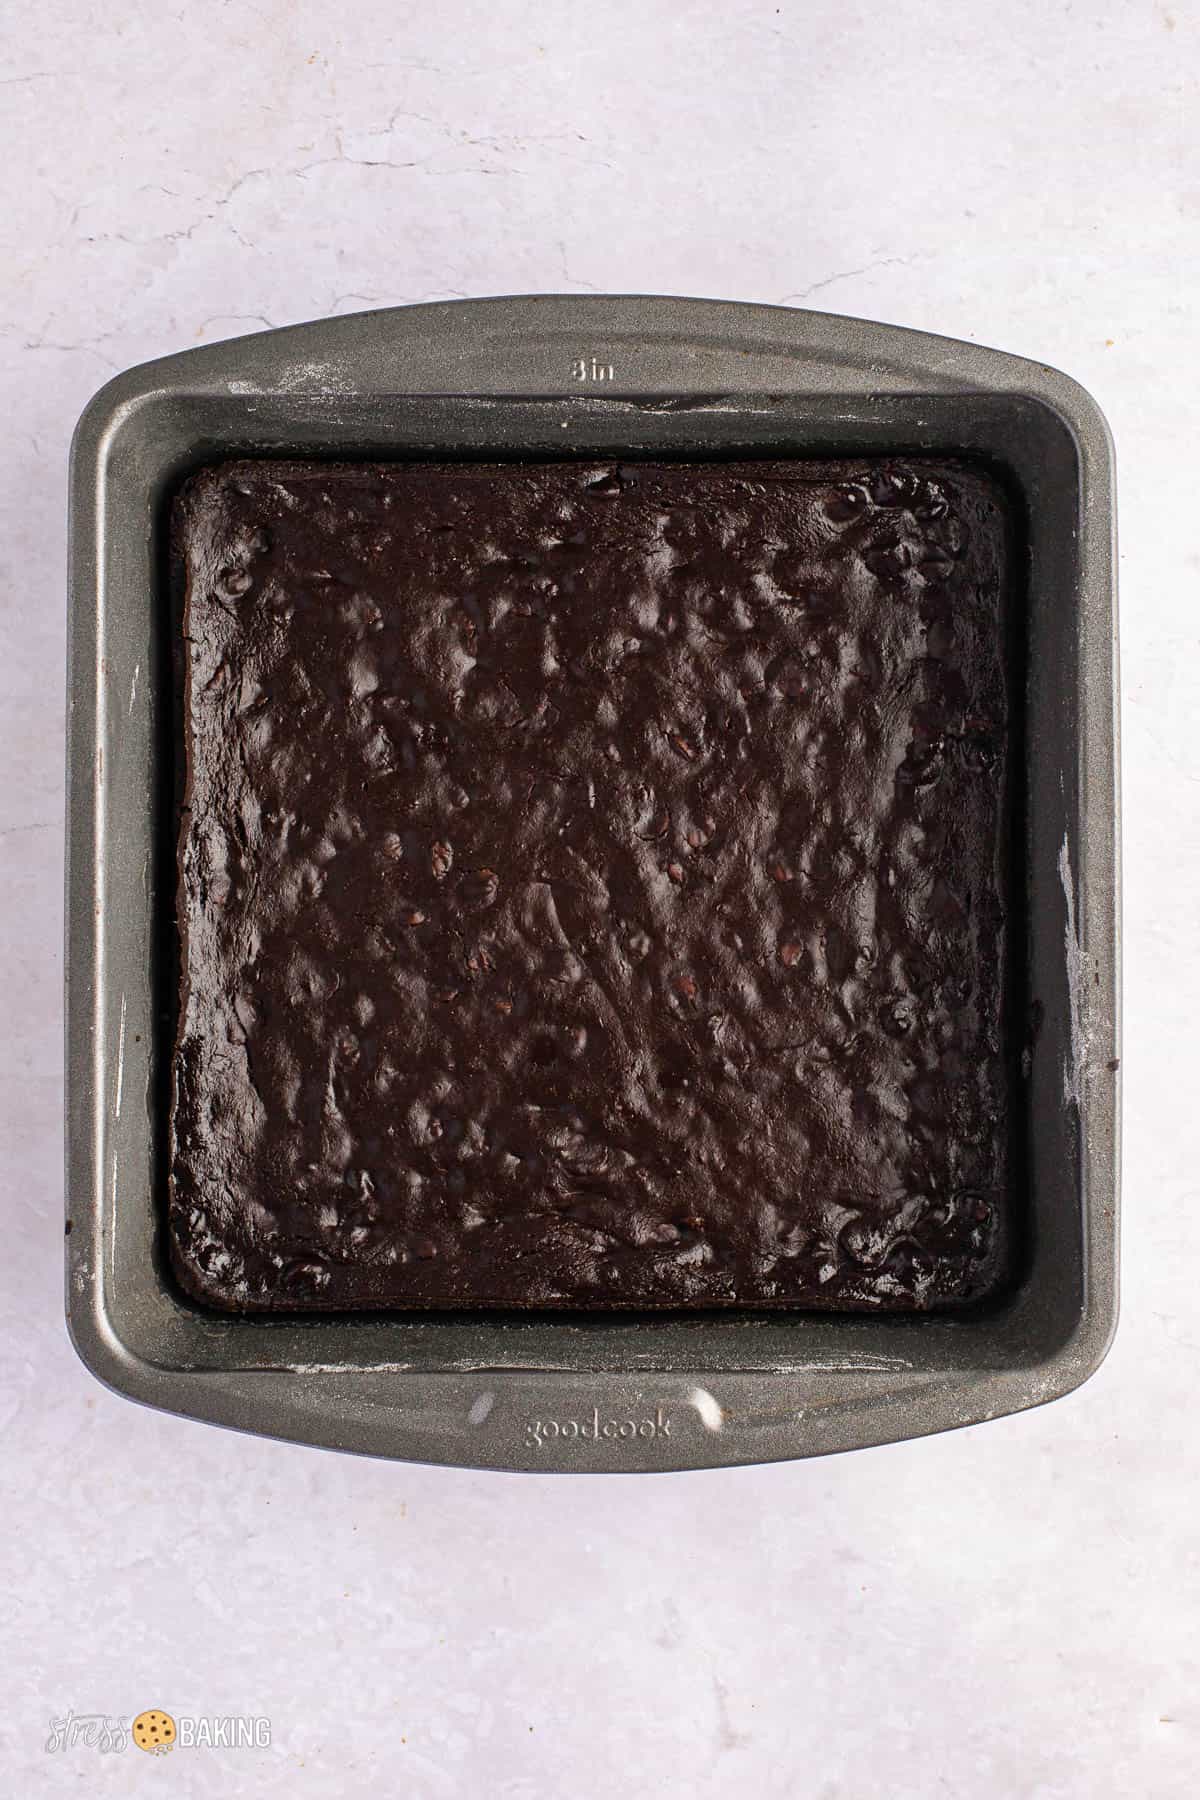 Square baking pan of dark chocolate brownies with a crackly top